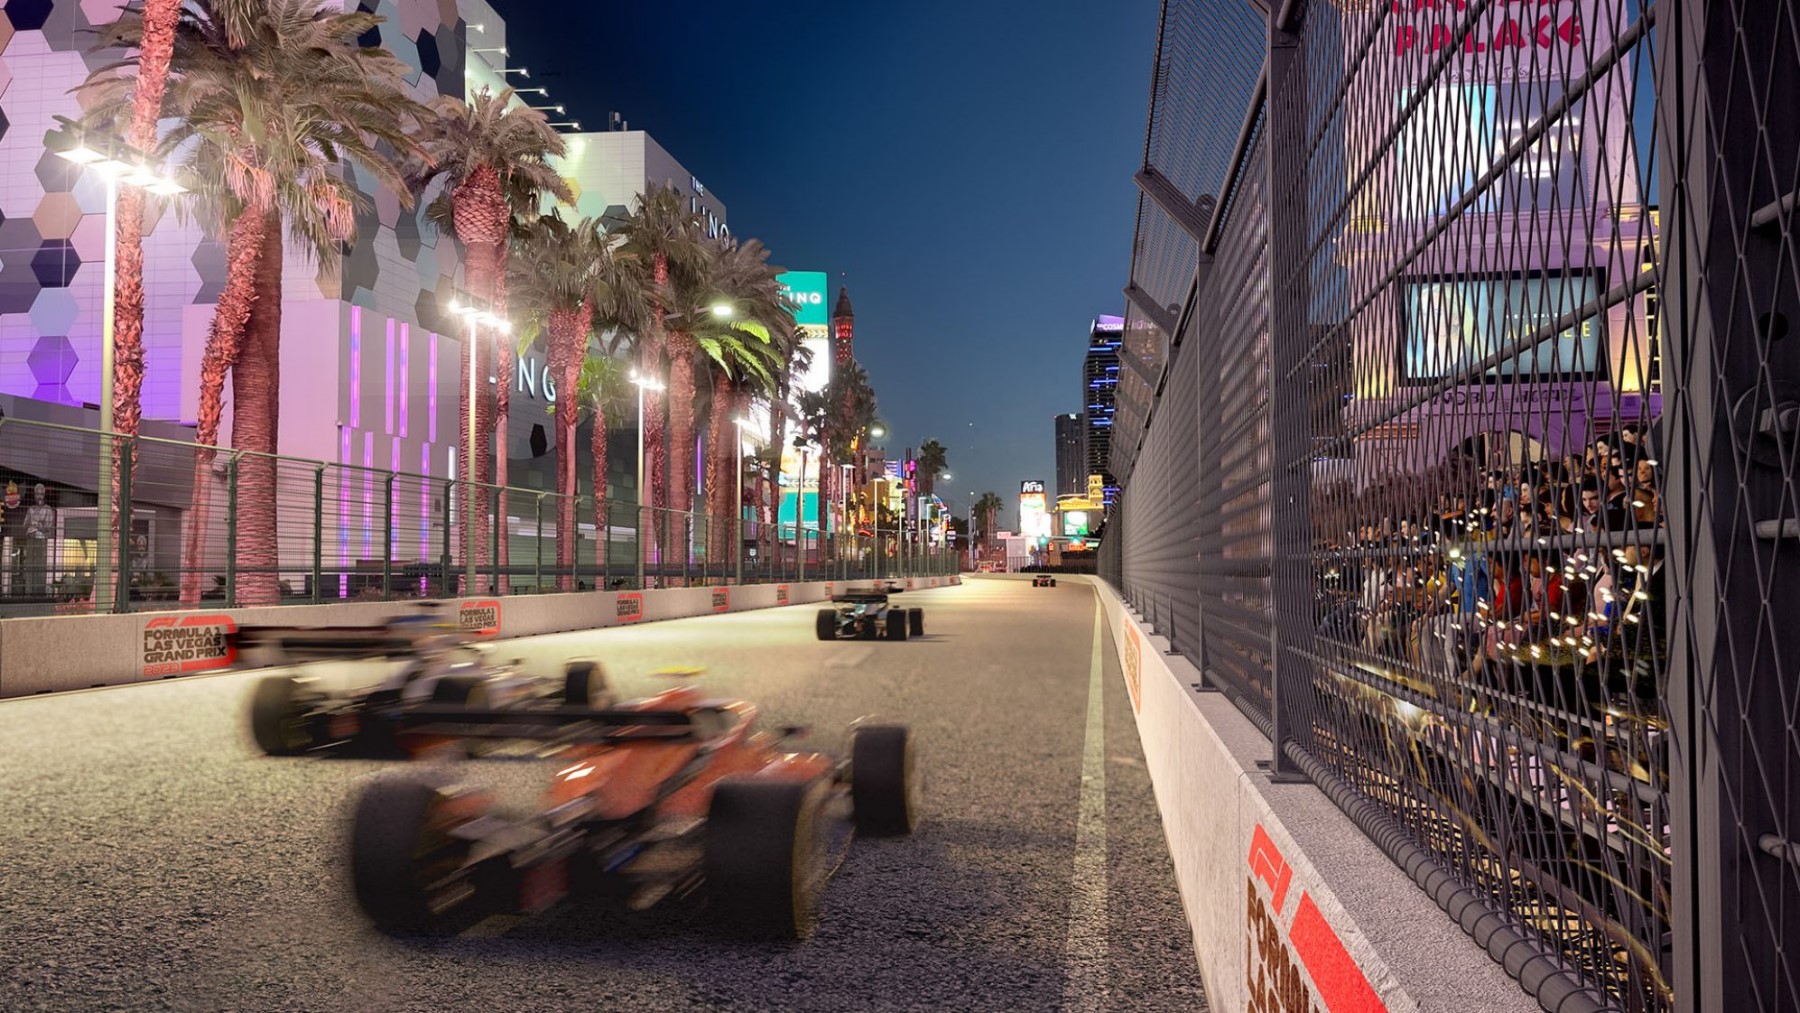 F1 Plans to provide affordable General Admission tickets for Las Vegas